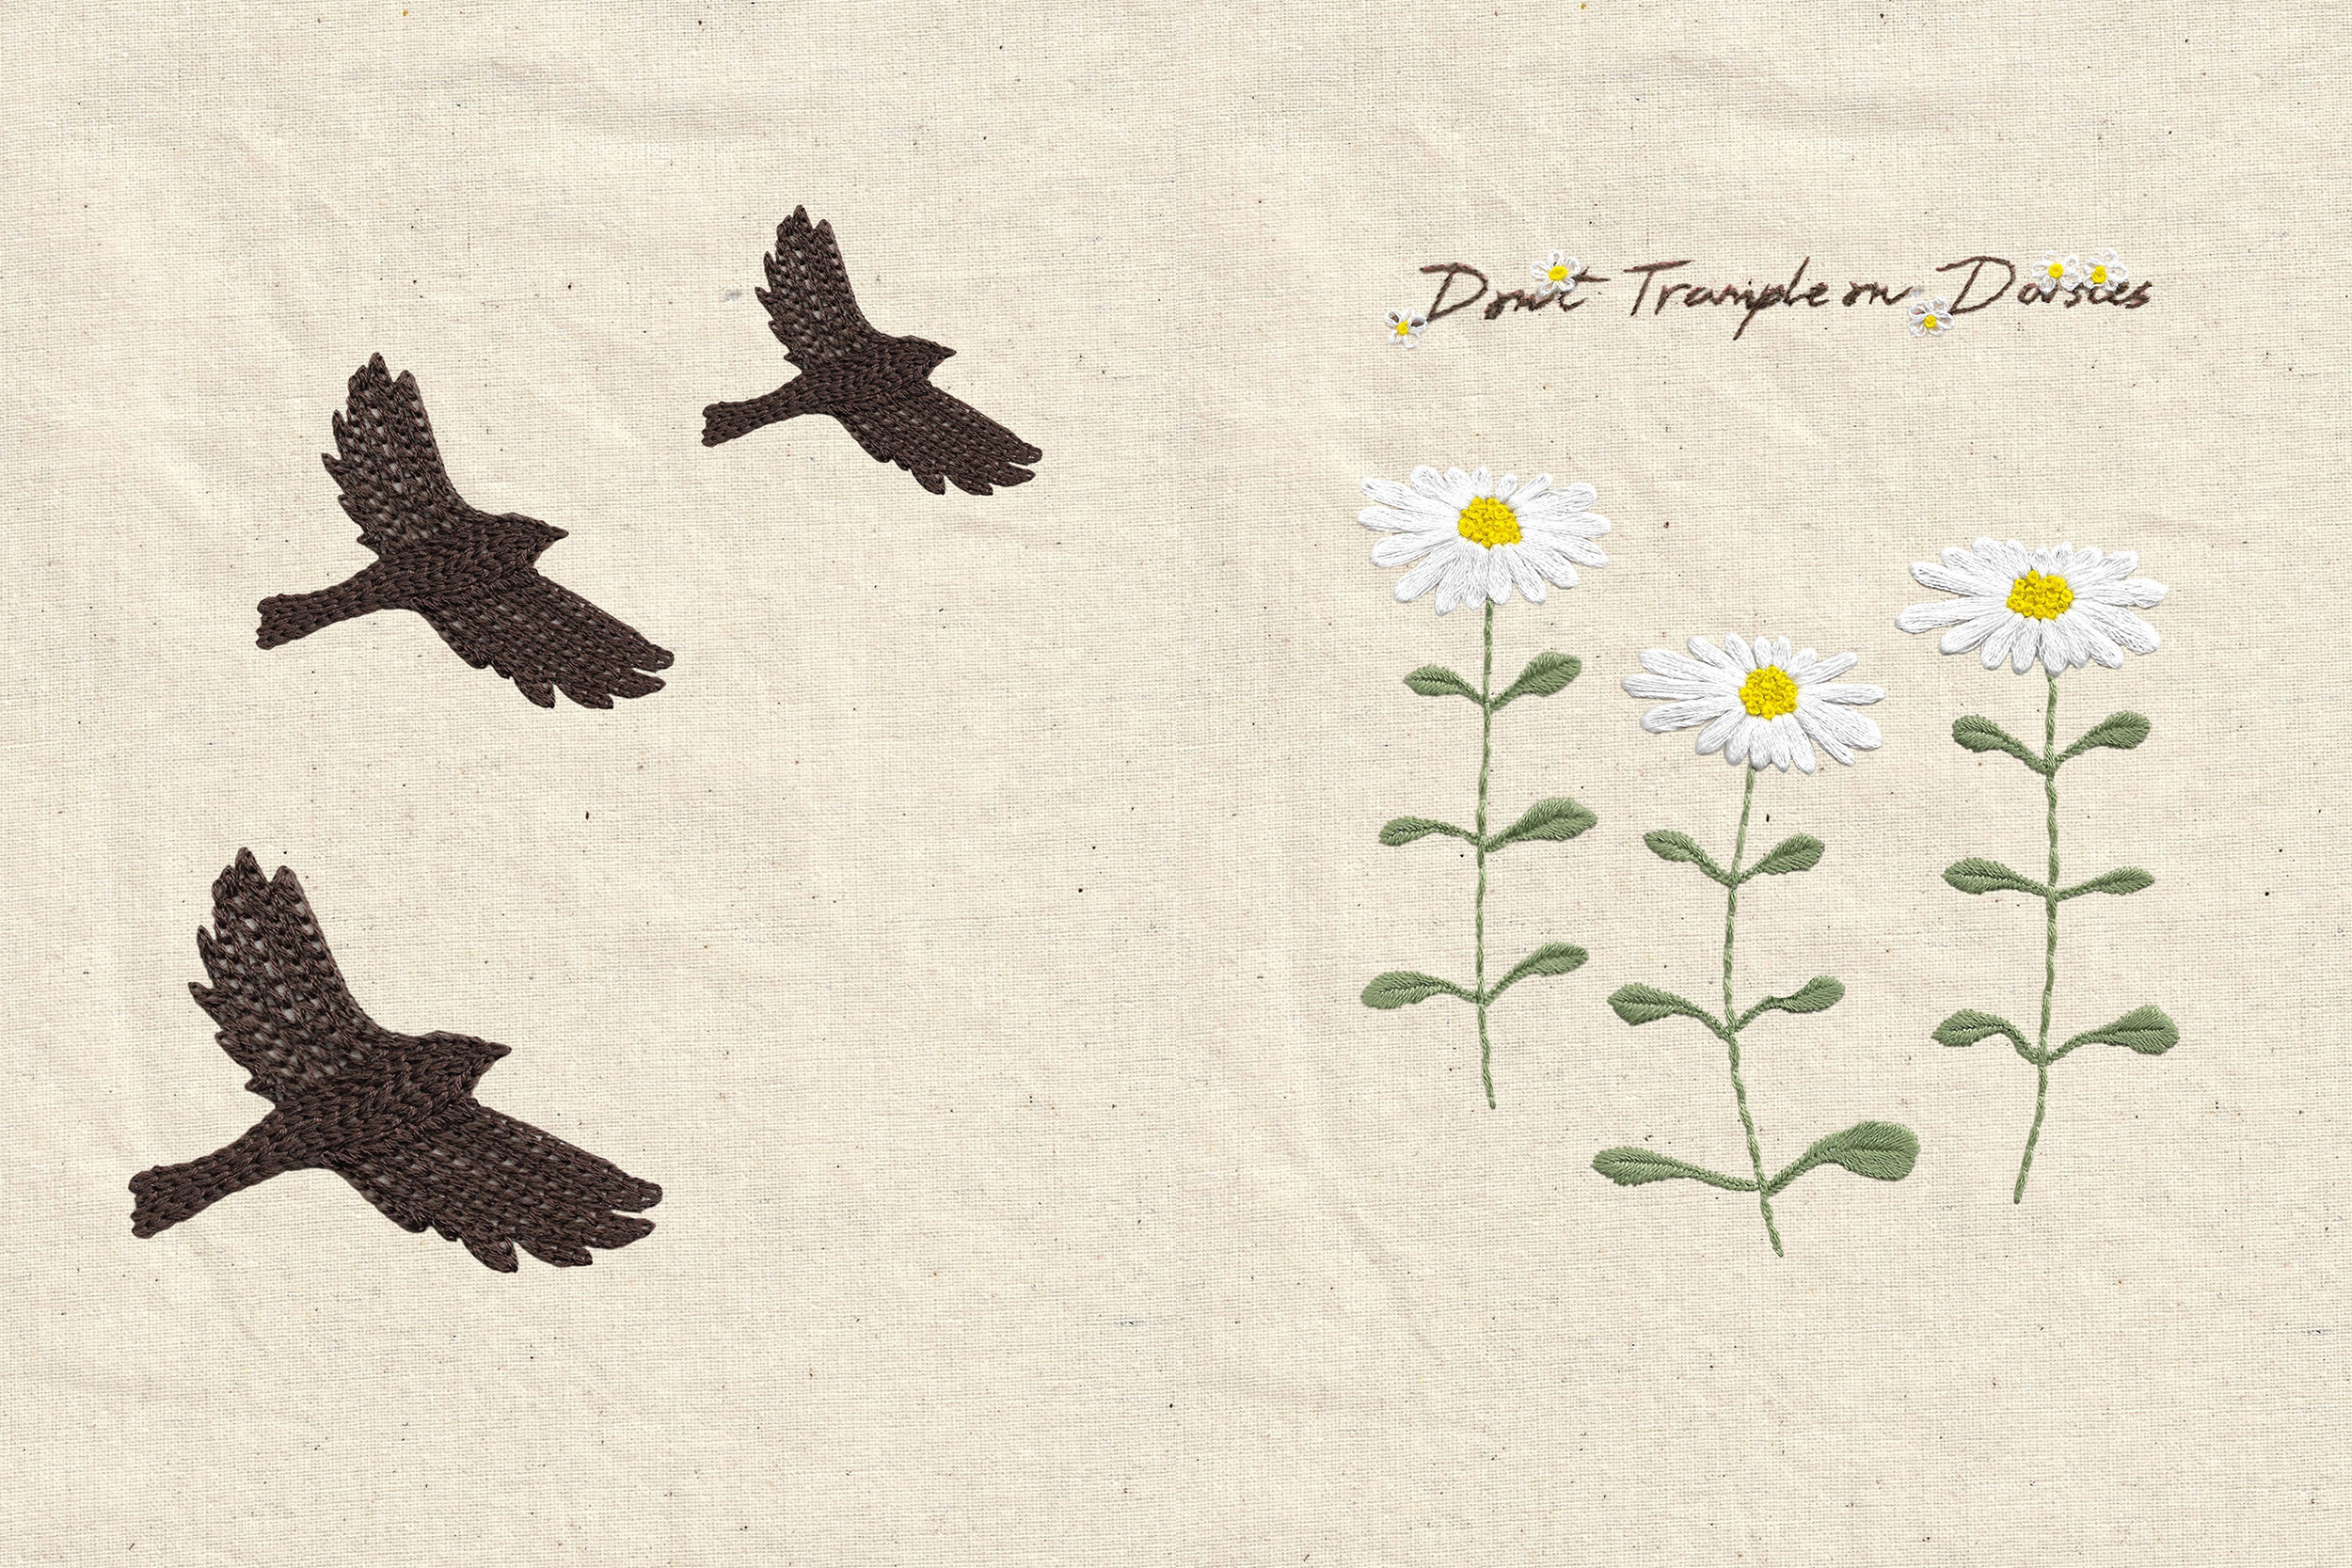 Hand embroidery of three flying goldfinch silhouettes on the left and three oxeye daisies on the right with the text 'don't trample on daisies' also embroidered above in cursive font.